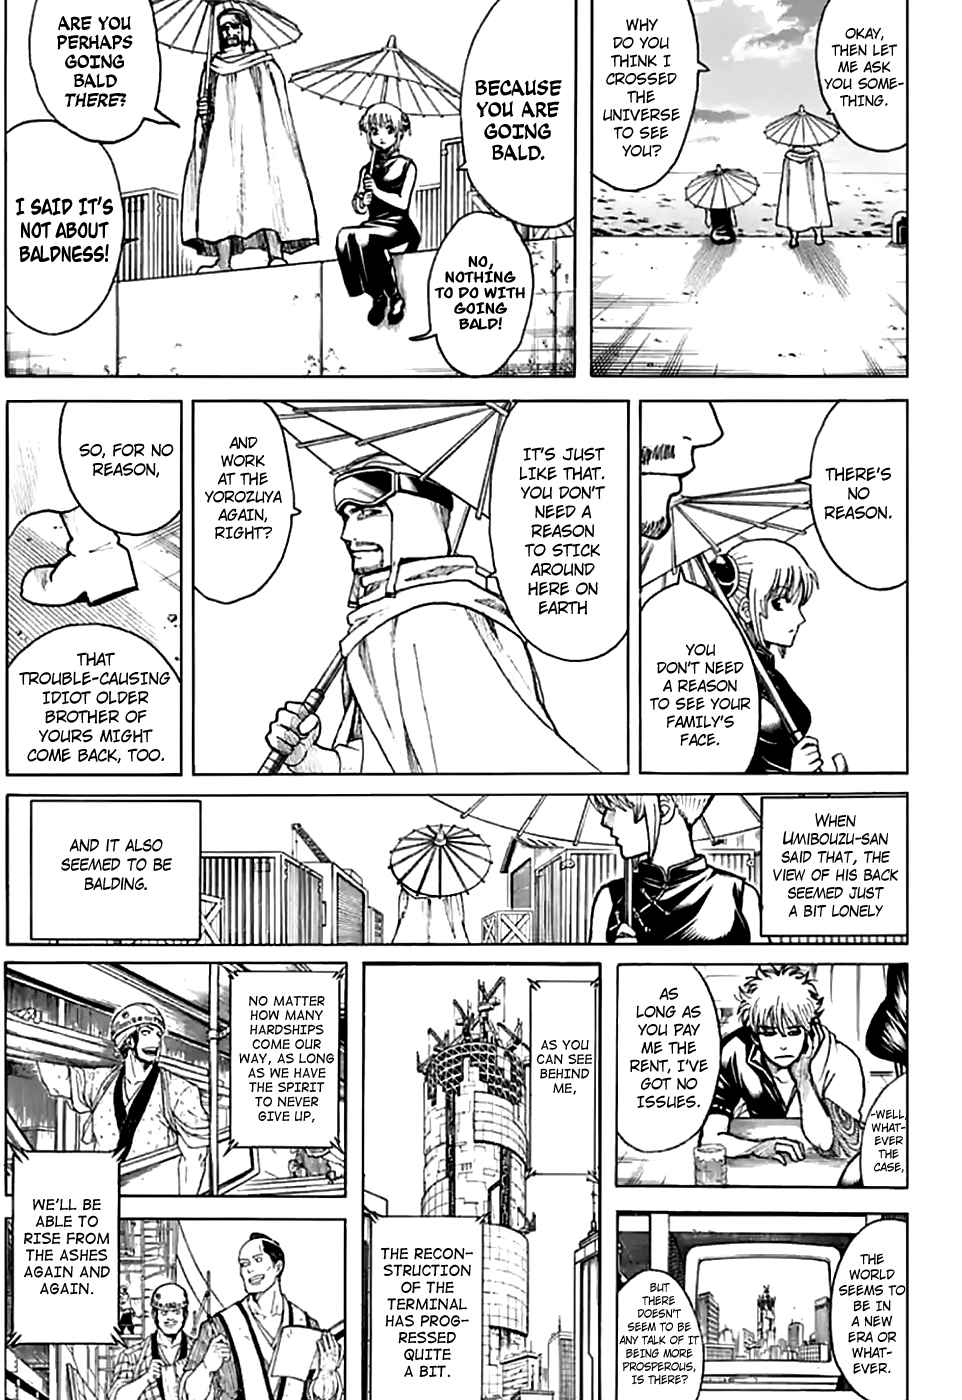 Gintama Vol. 77 Ch. 704 Nobody with a Natural Perm is a Decent Guy